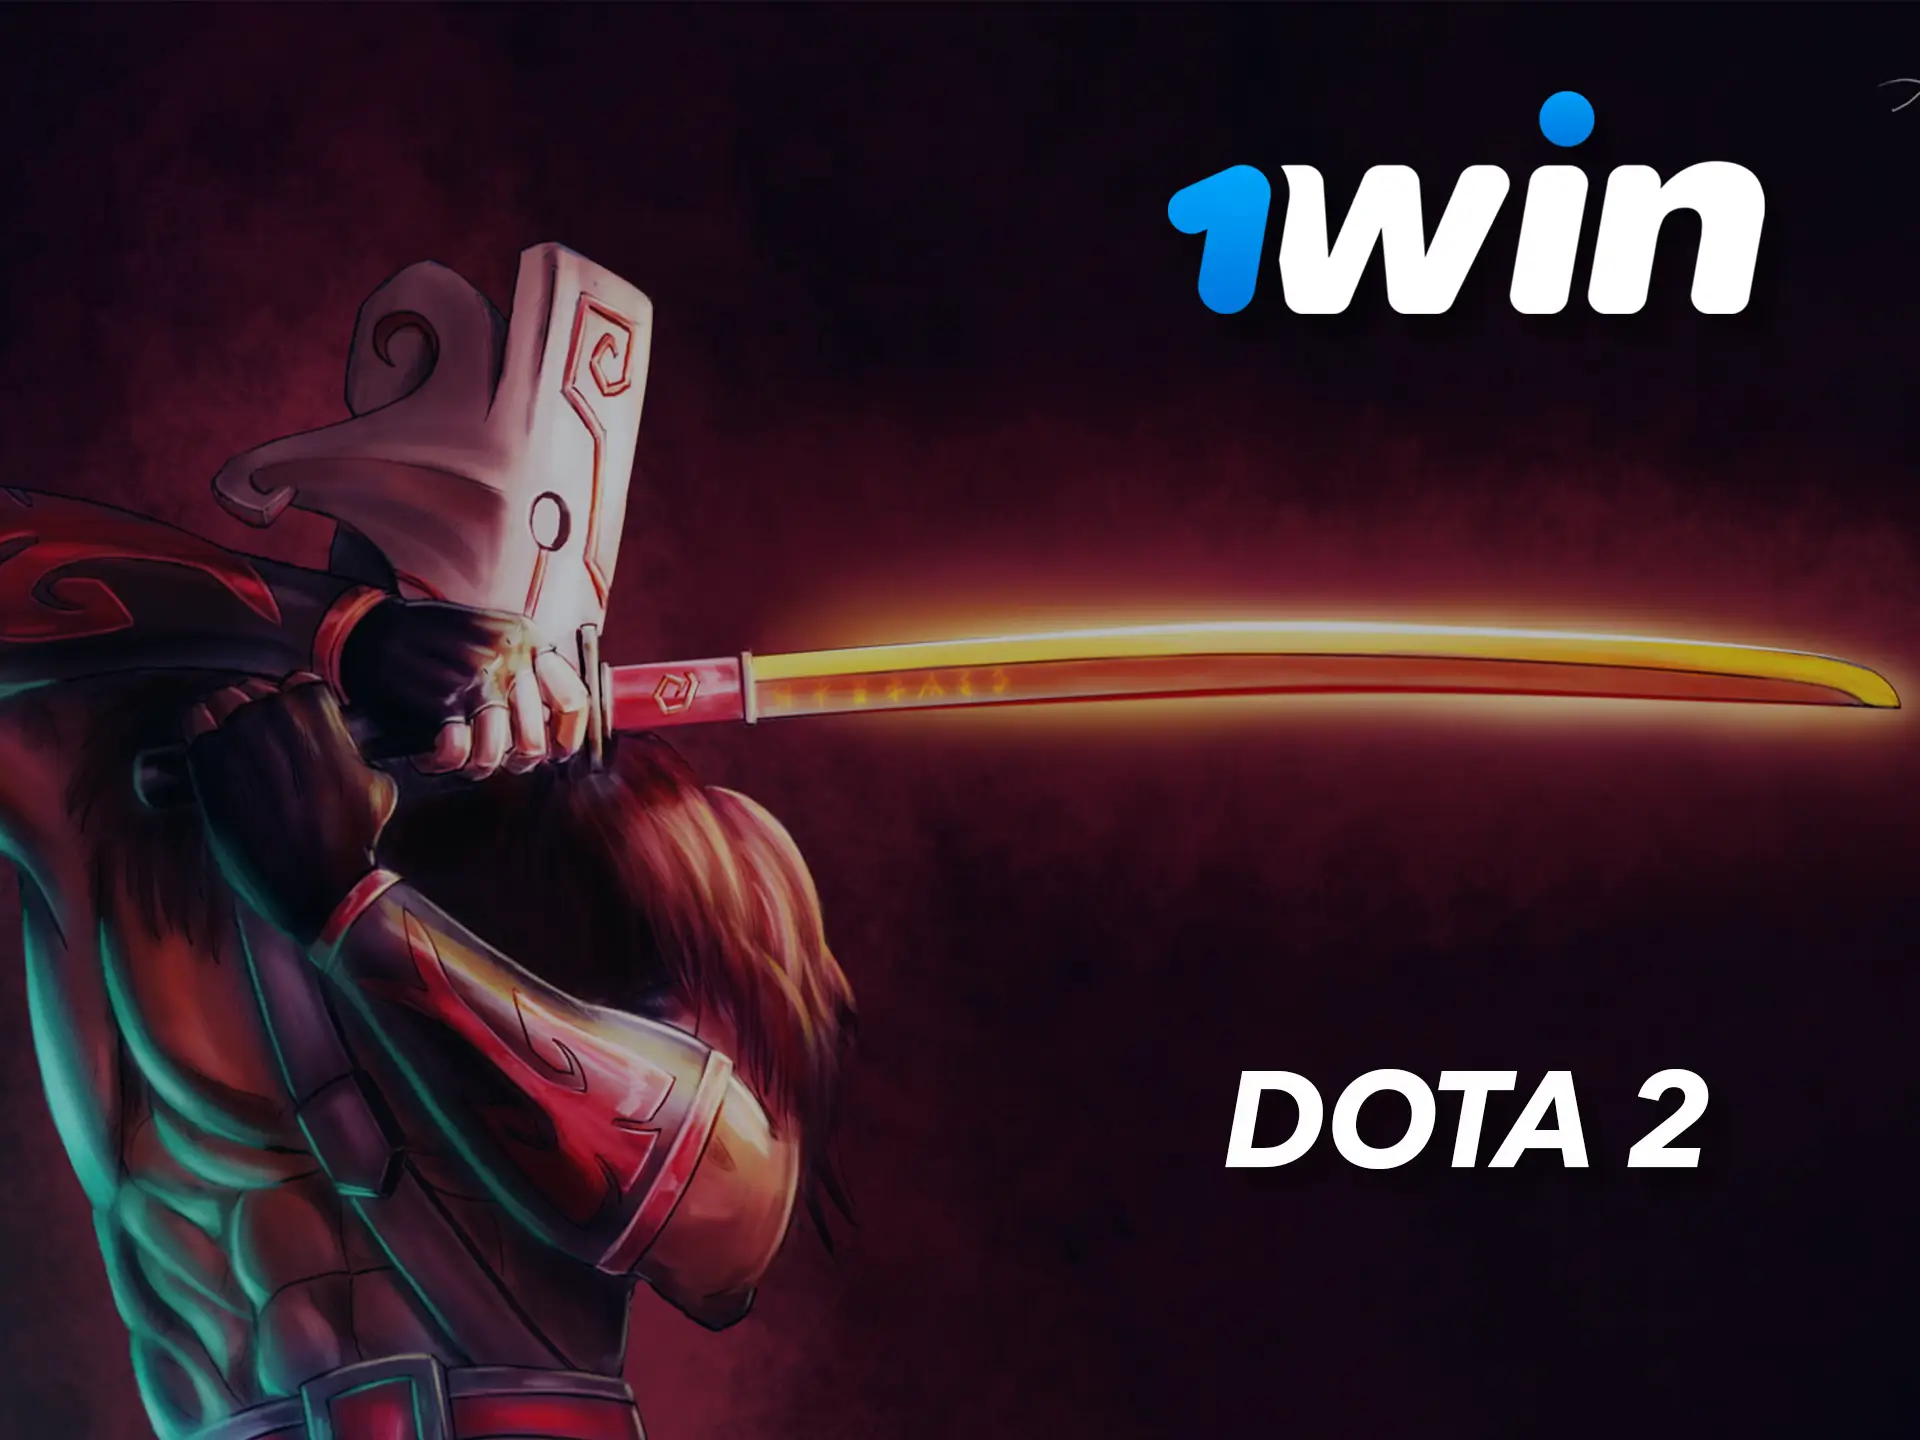 Use 1WIn stats to bet and win in dota 2 game.